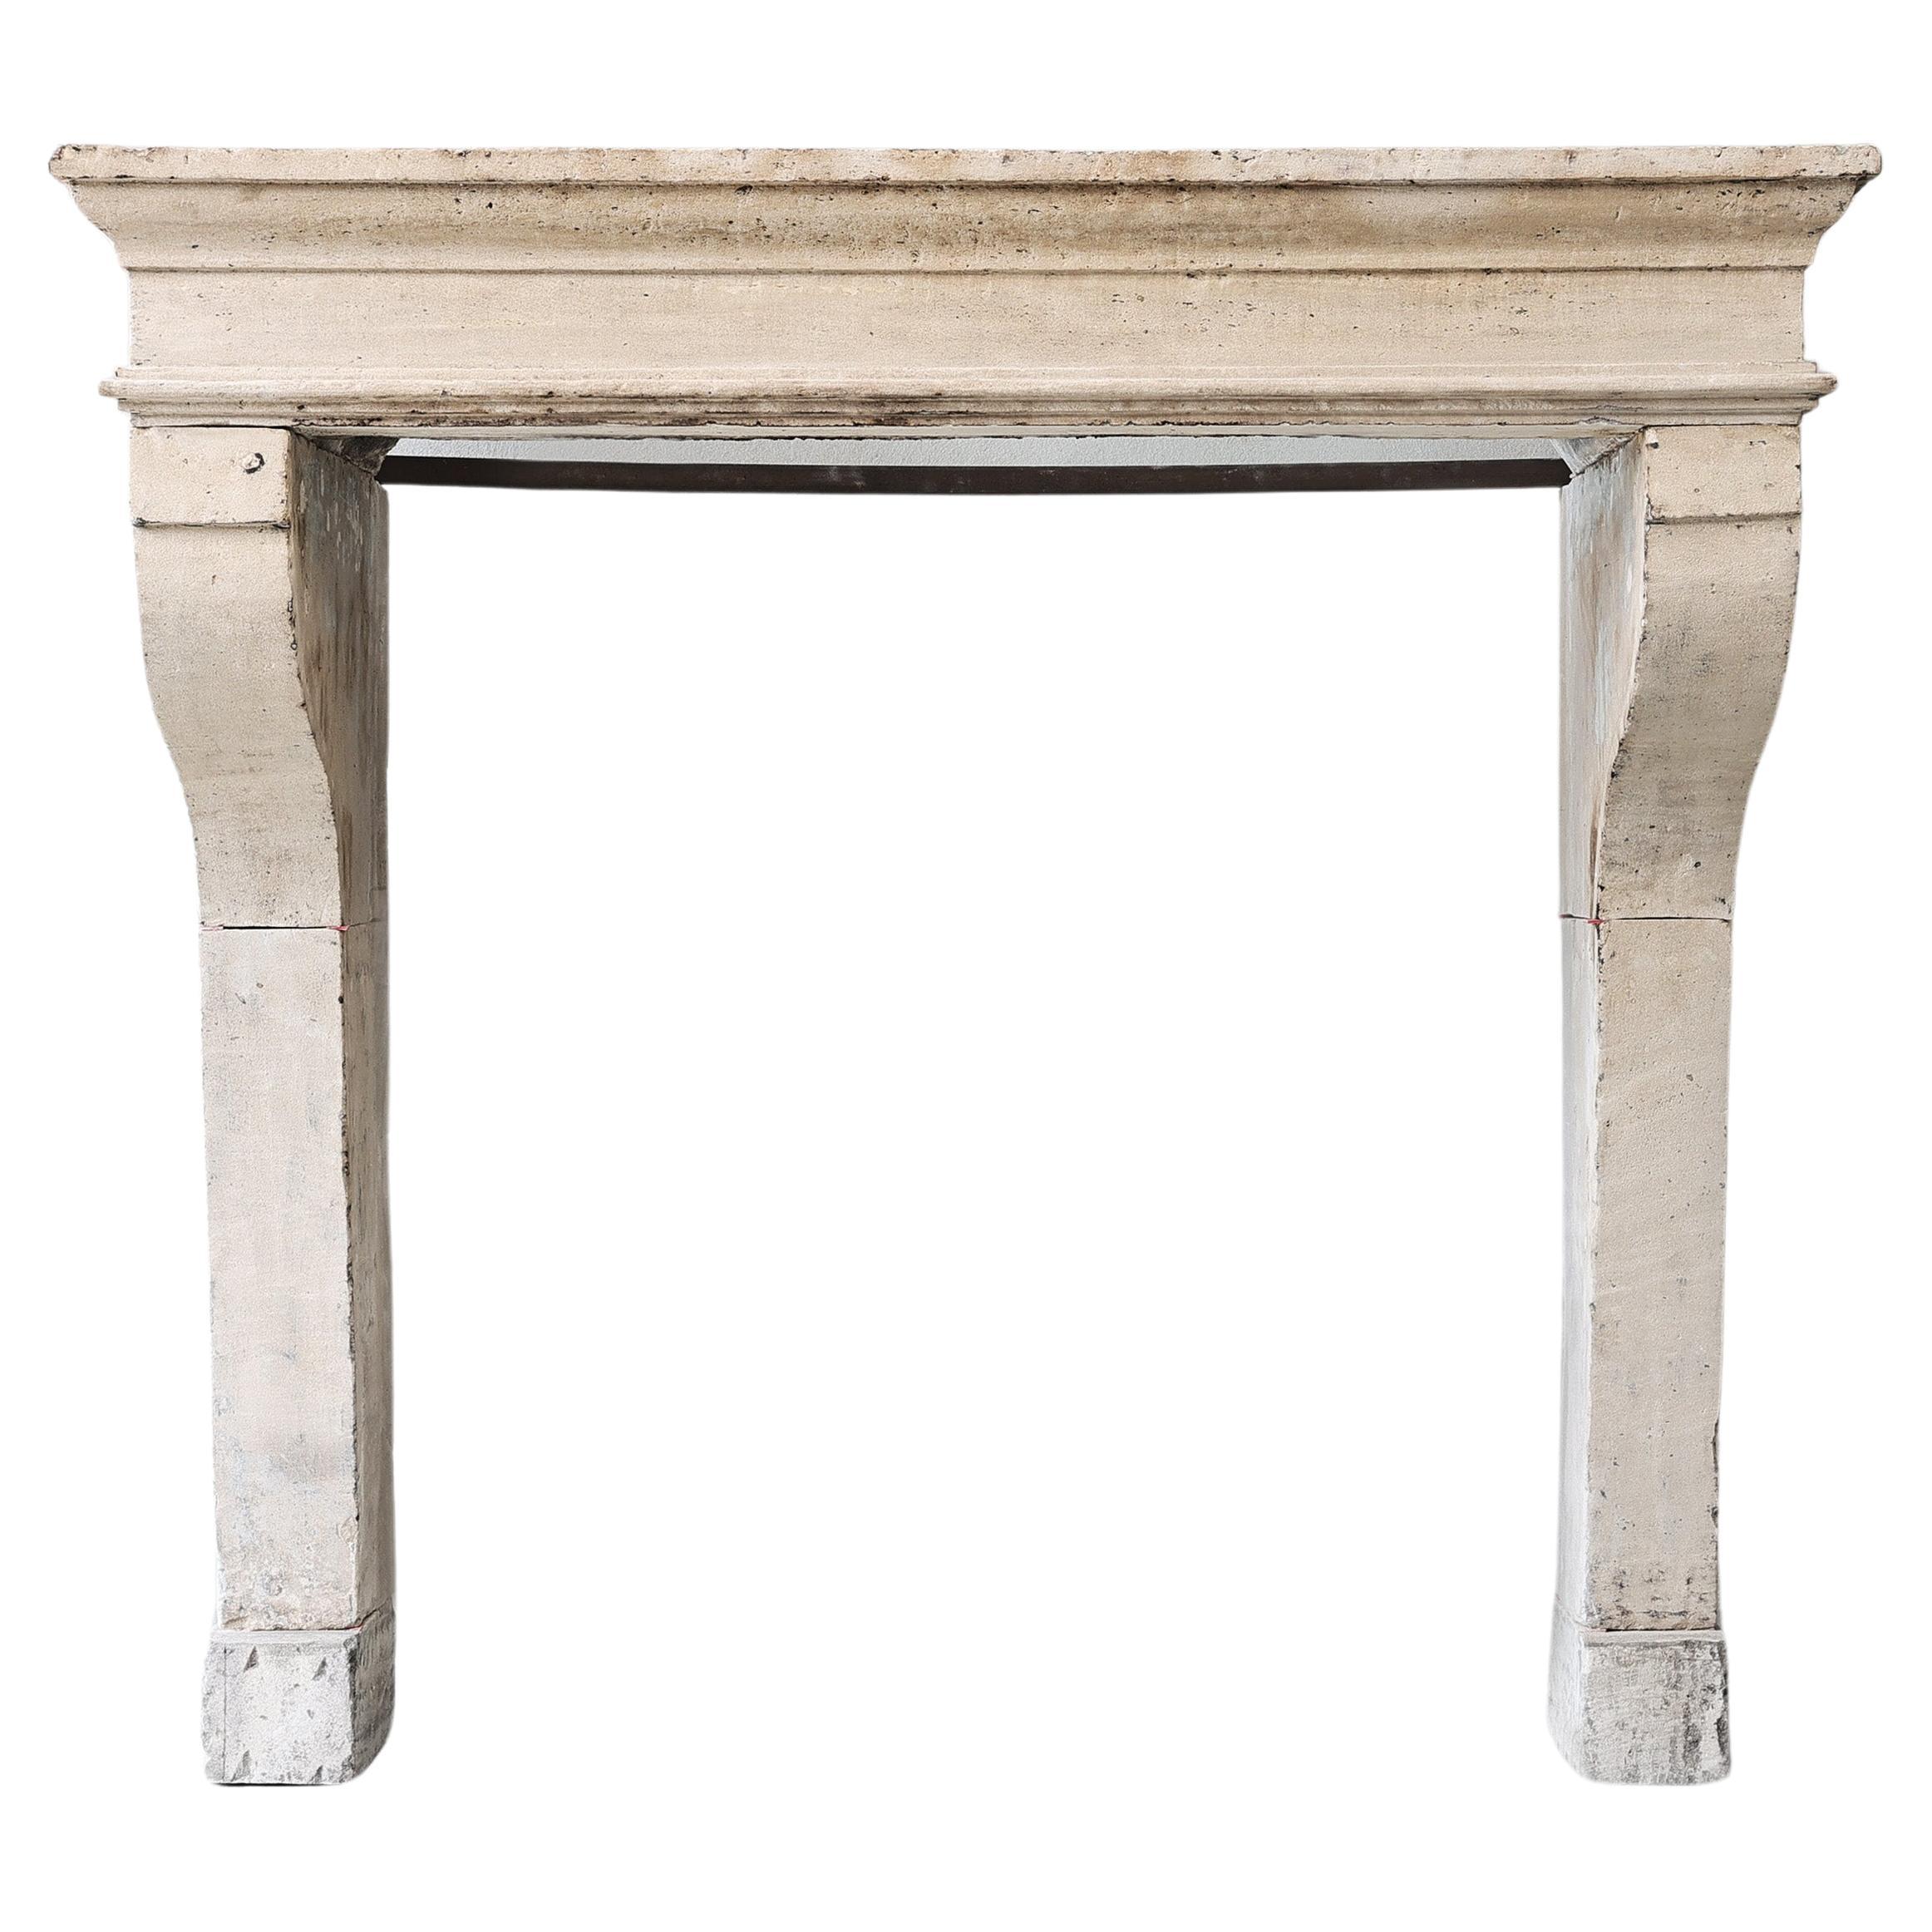 Antique fireplace of French limestone